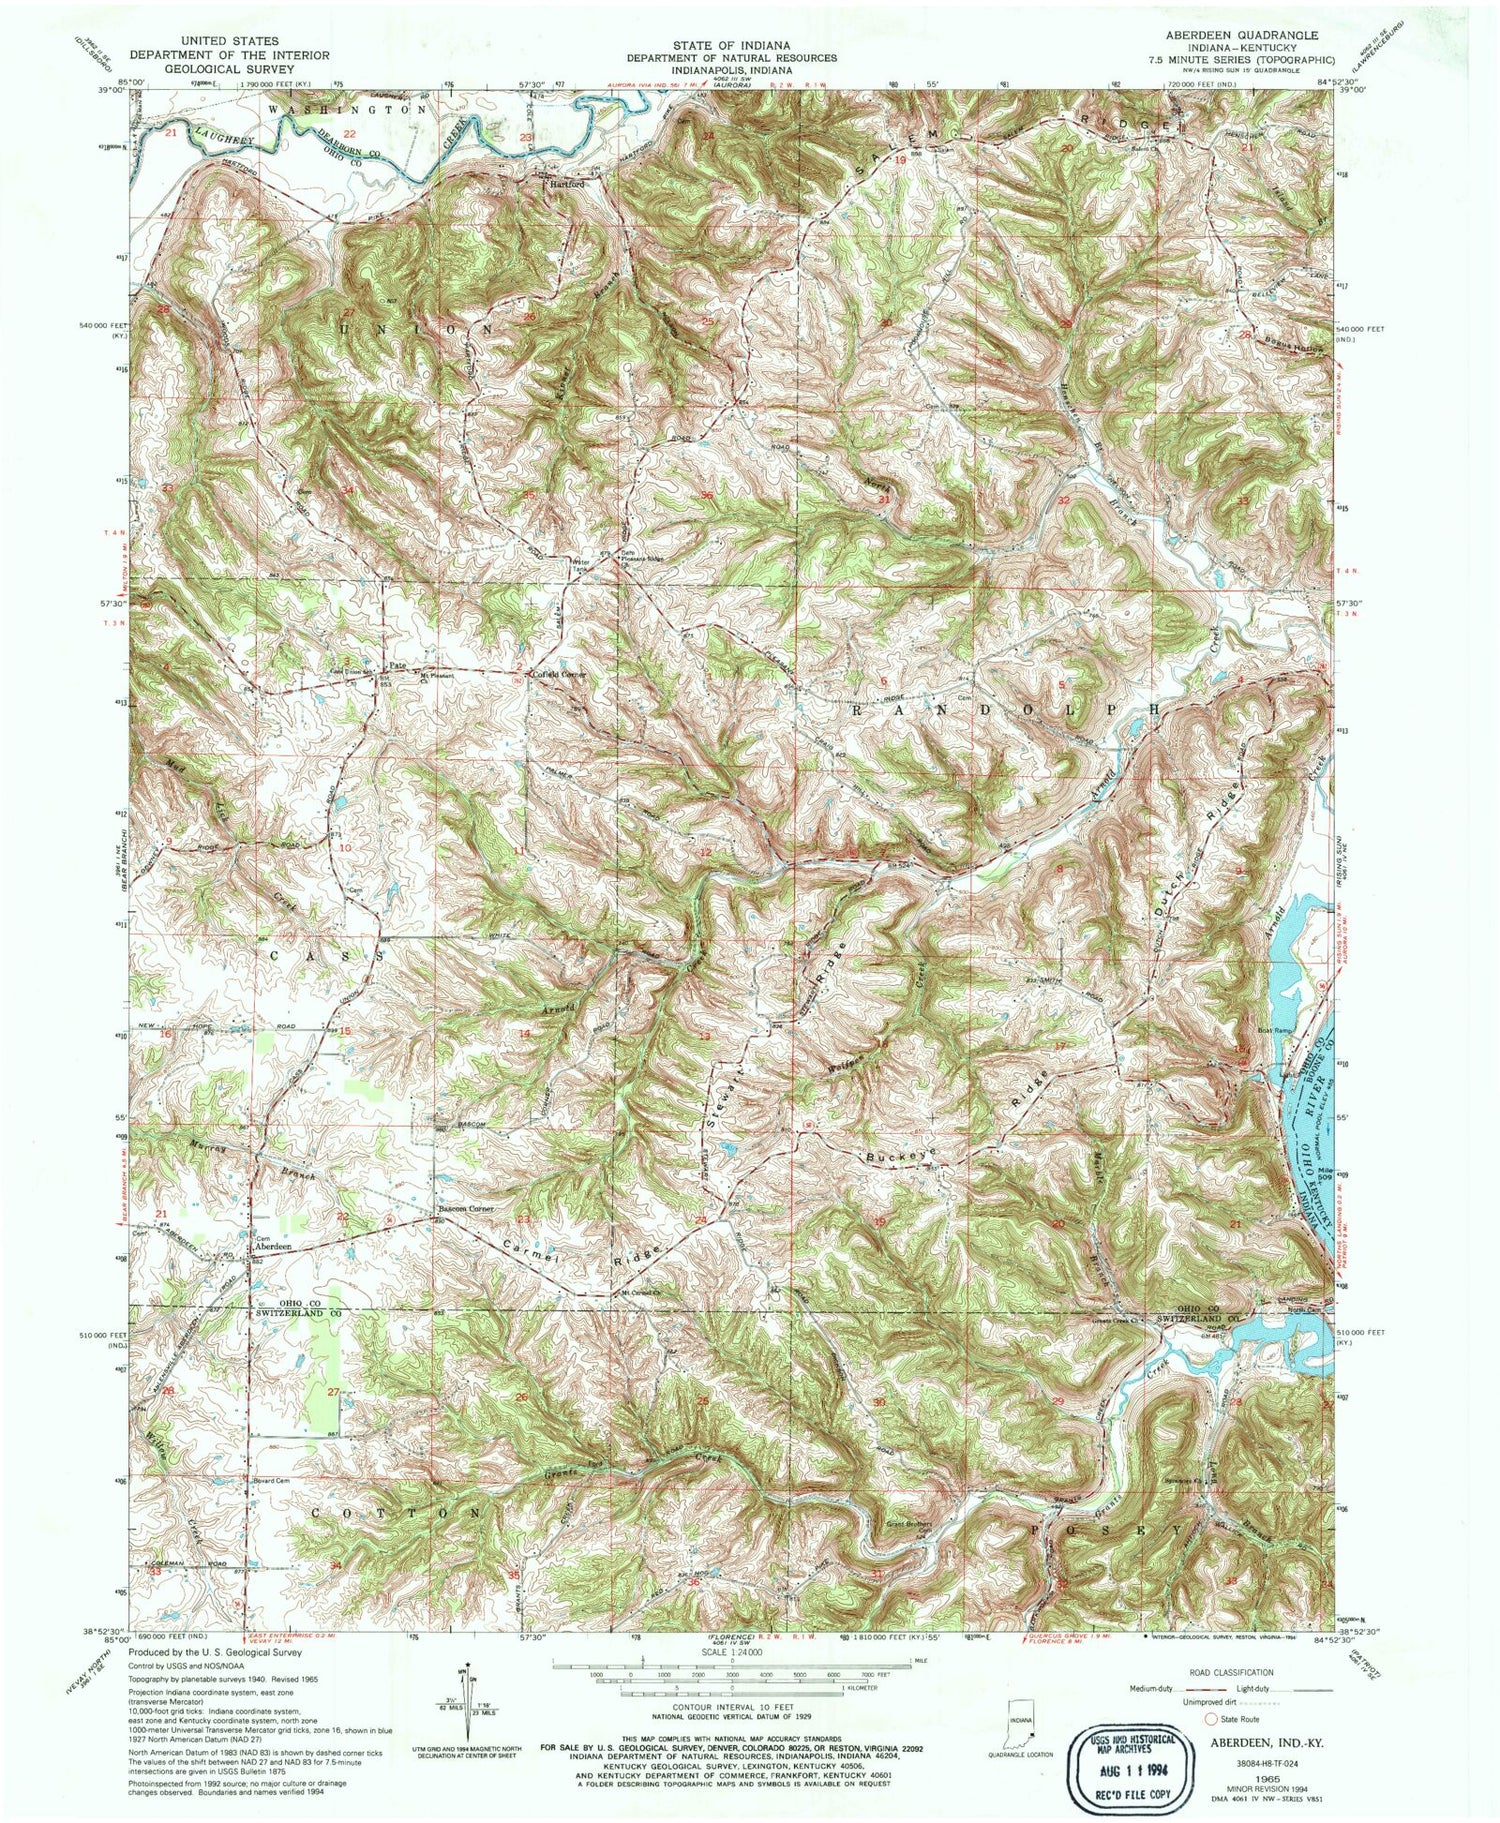 Classic USGS Aberdeen Indiana 7.5'x7.5' Topo Map Image